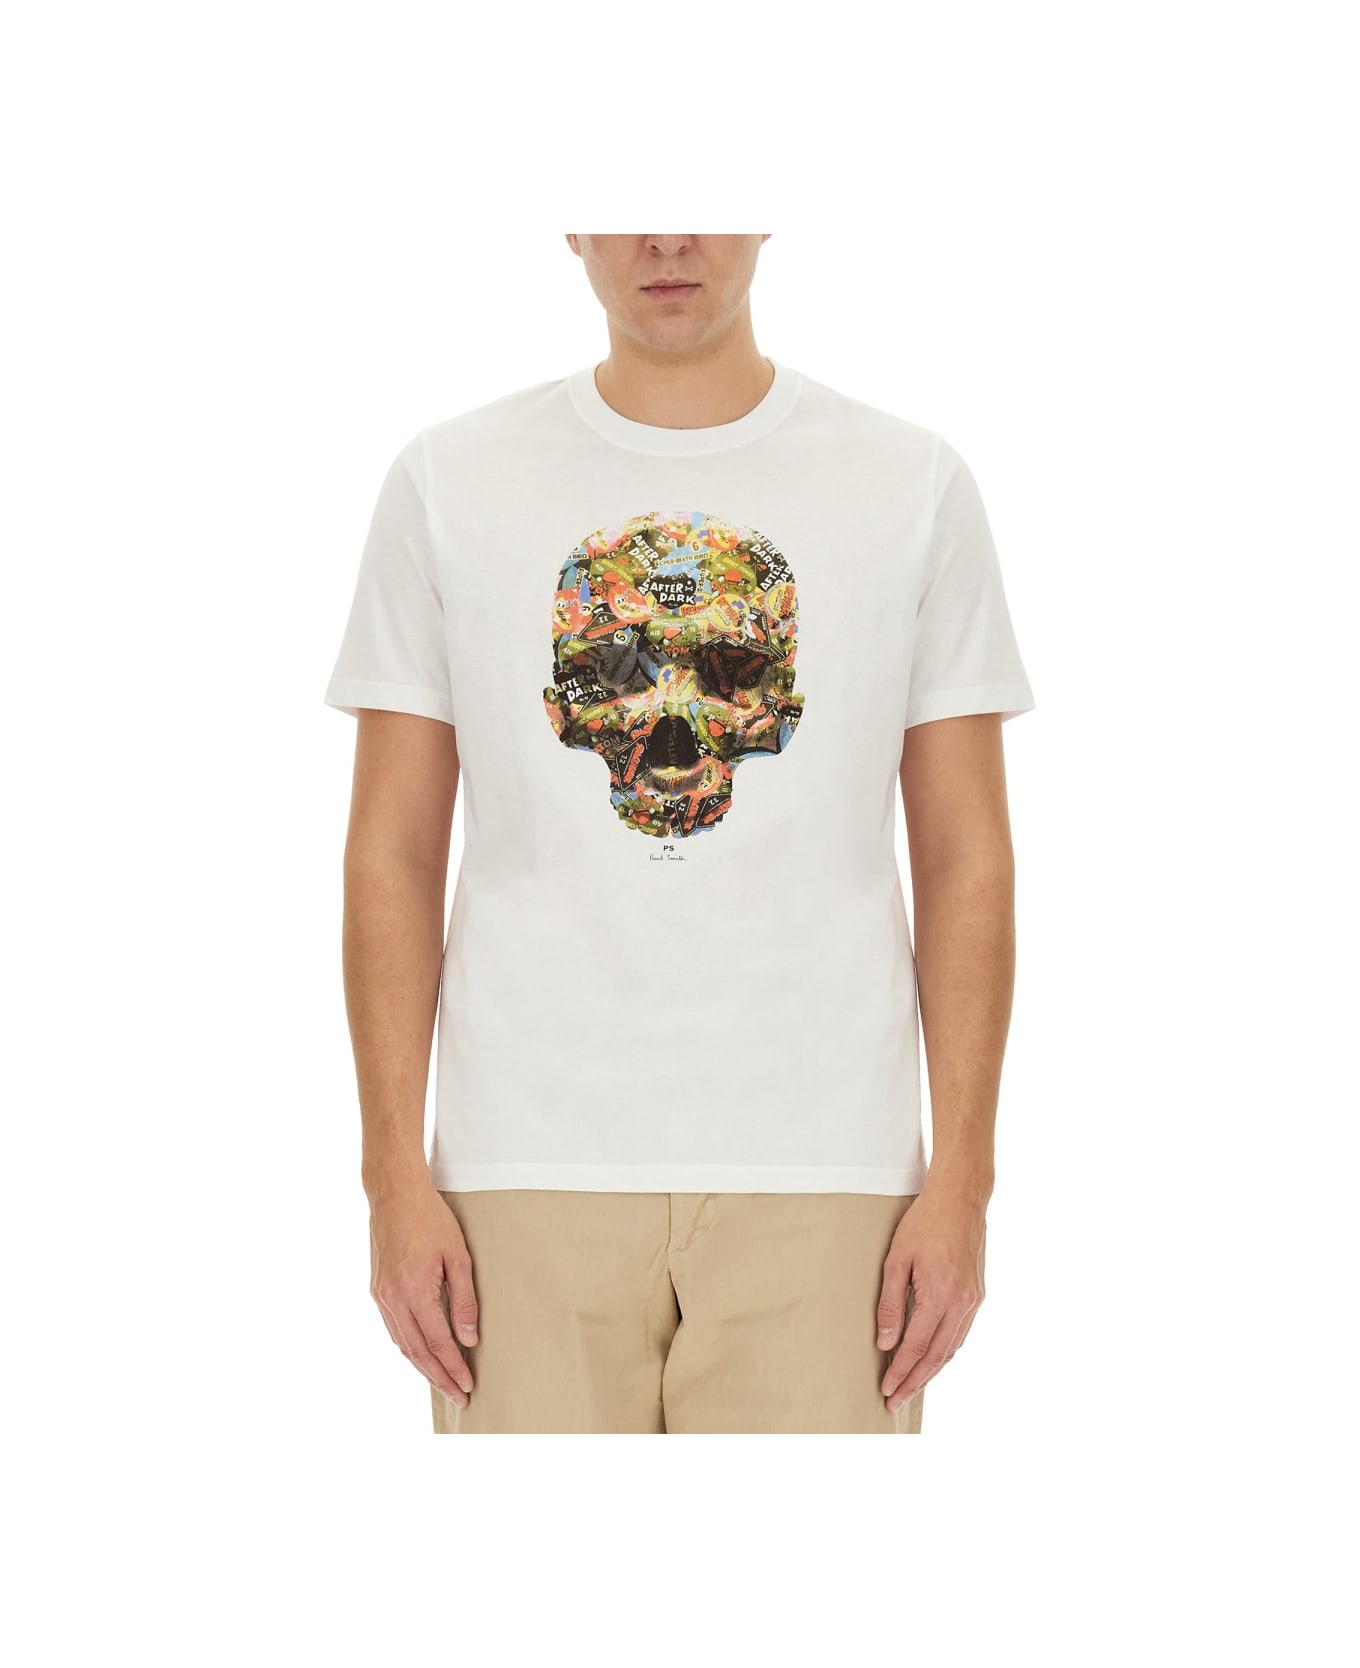 PS by Paul Smith Skull Print T-shirt - WHITE